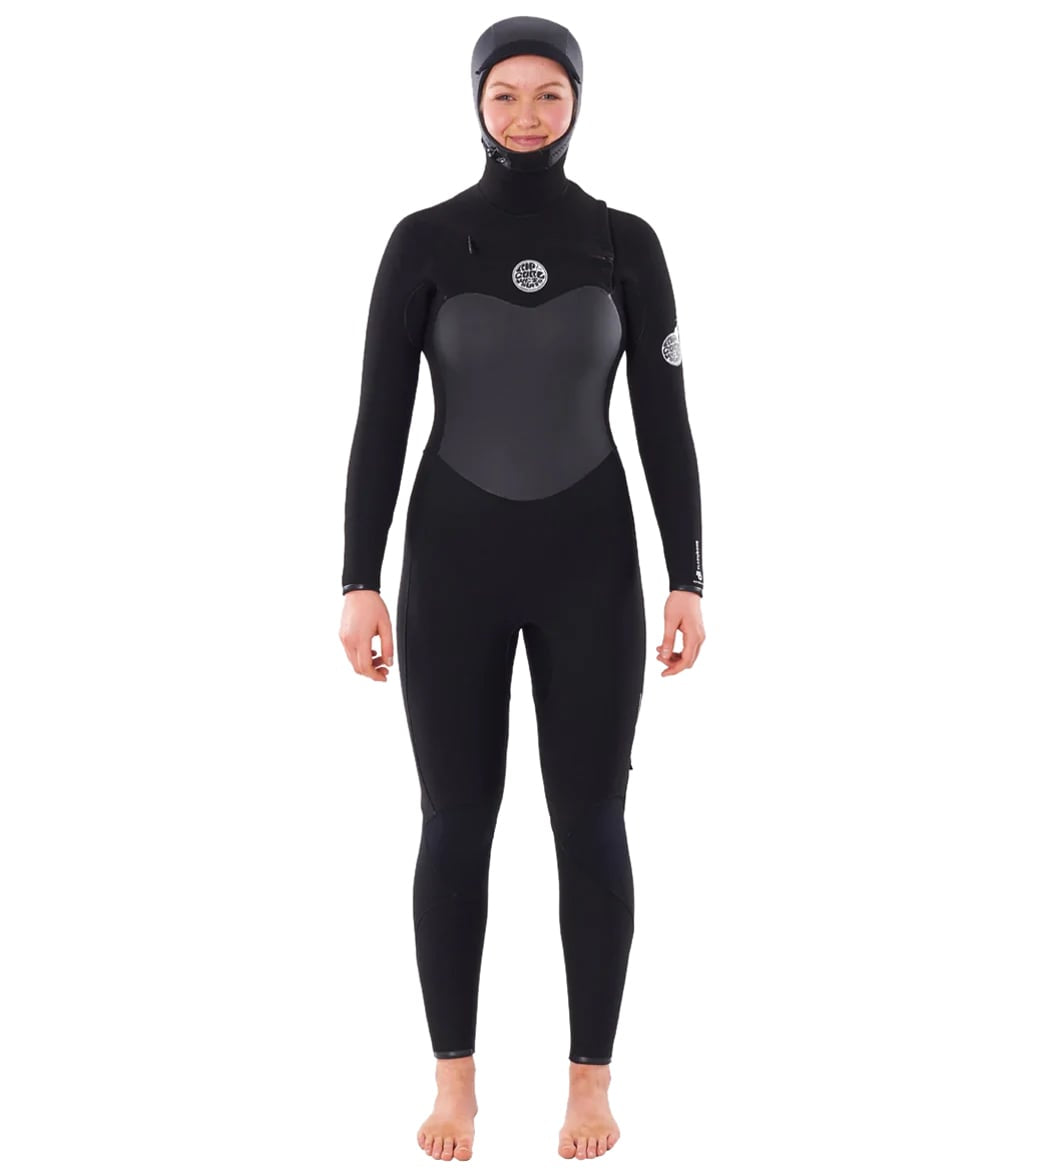 Rip Curl Womens 6/4 Flashbomb Long Sleeve Hooded Chest Zip Fullsuit Wetsuit